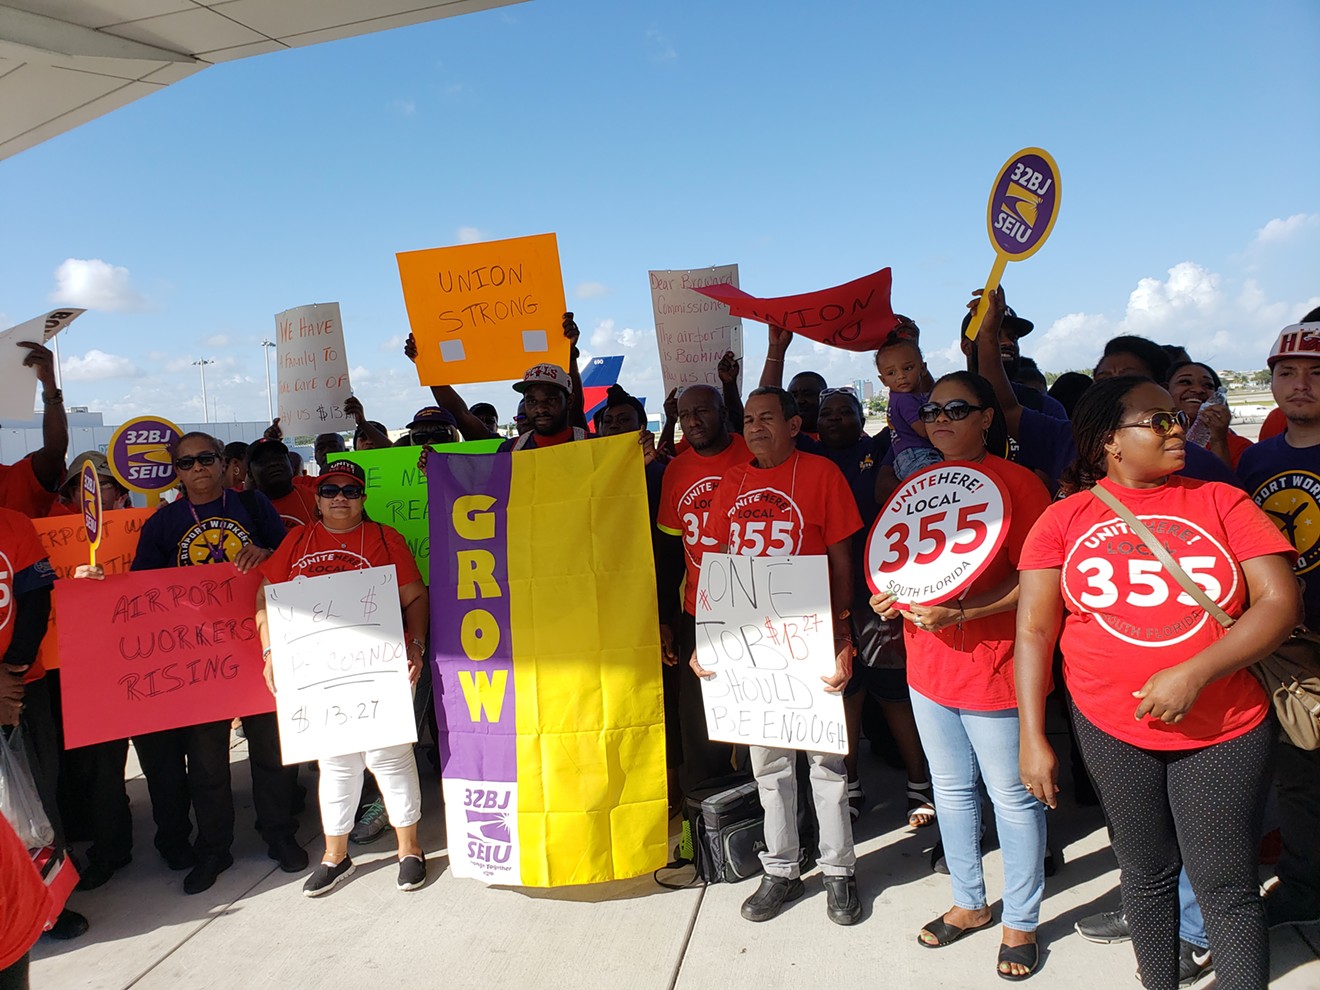 First, airport workers fought for a higher living wage. Now, they've turned their attention to advocating for an increased healthcare differential.